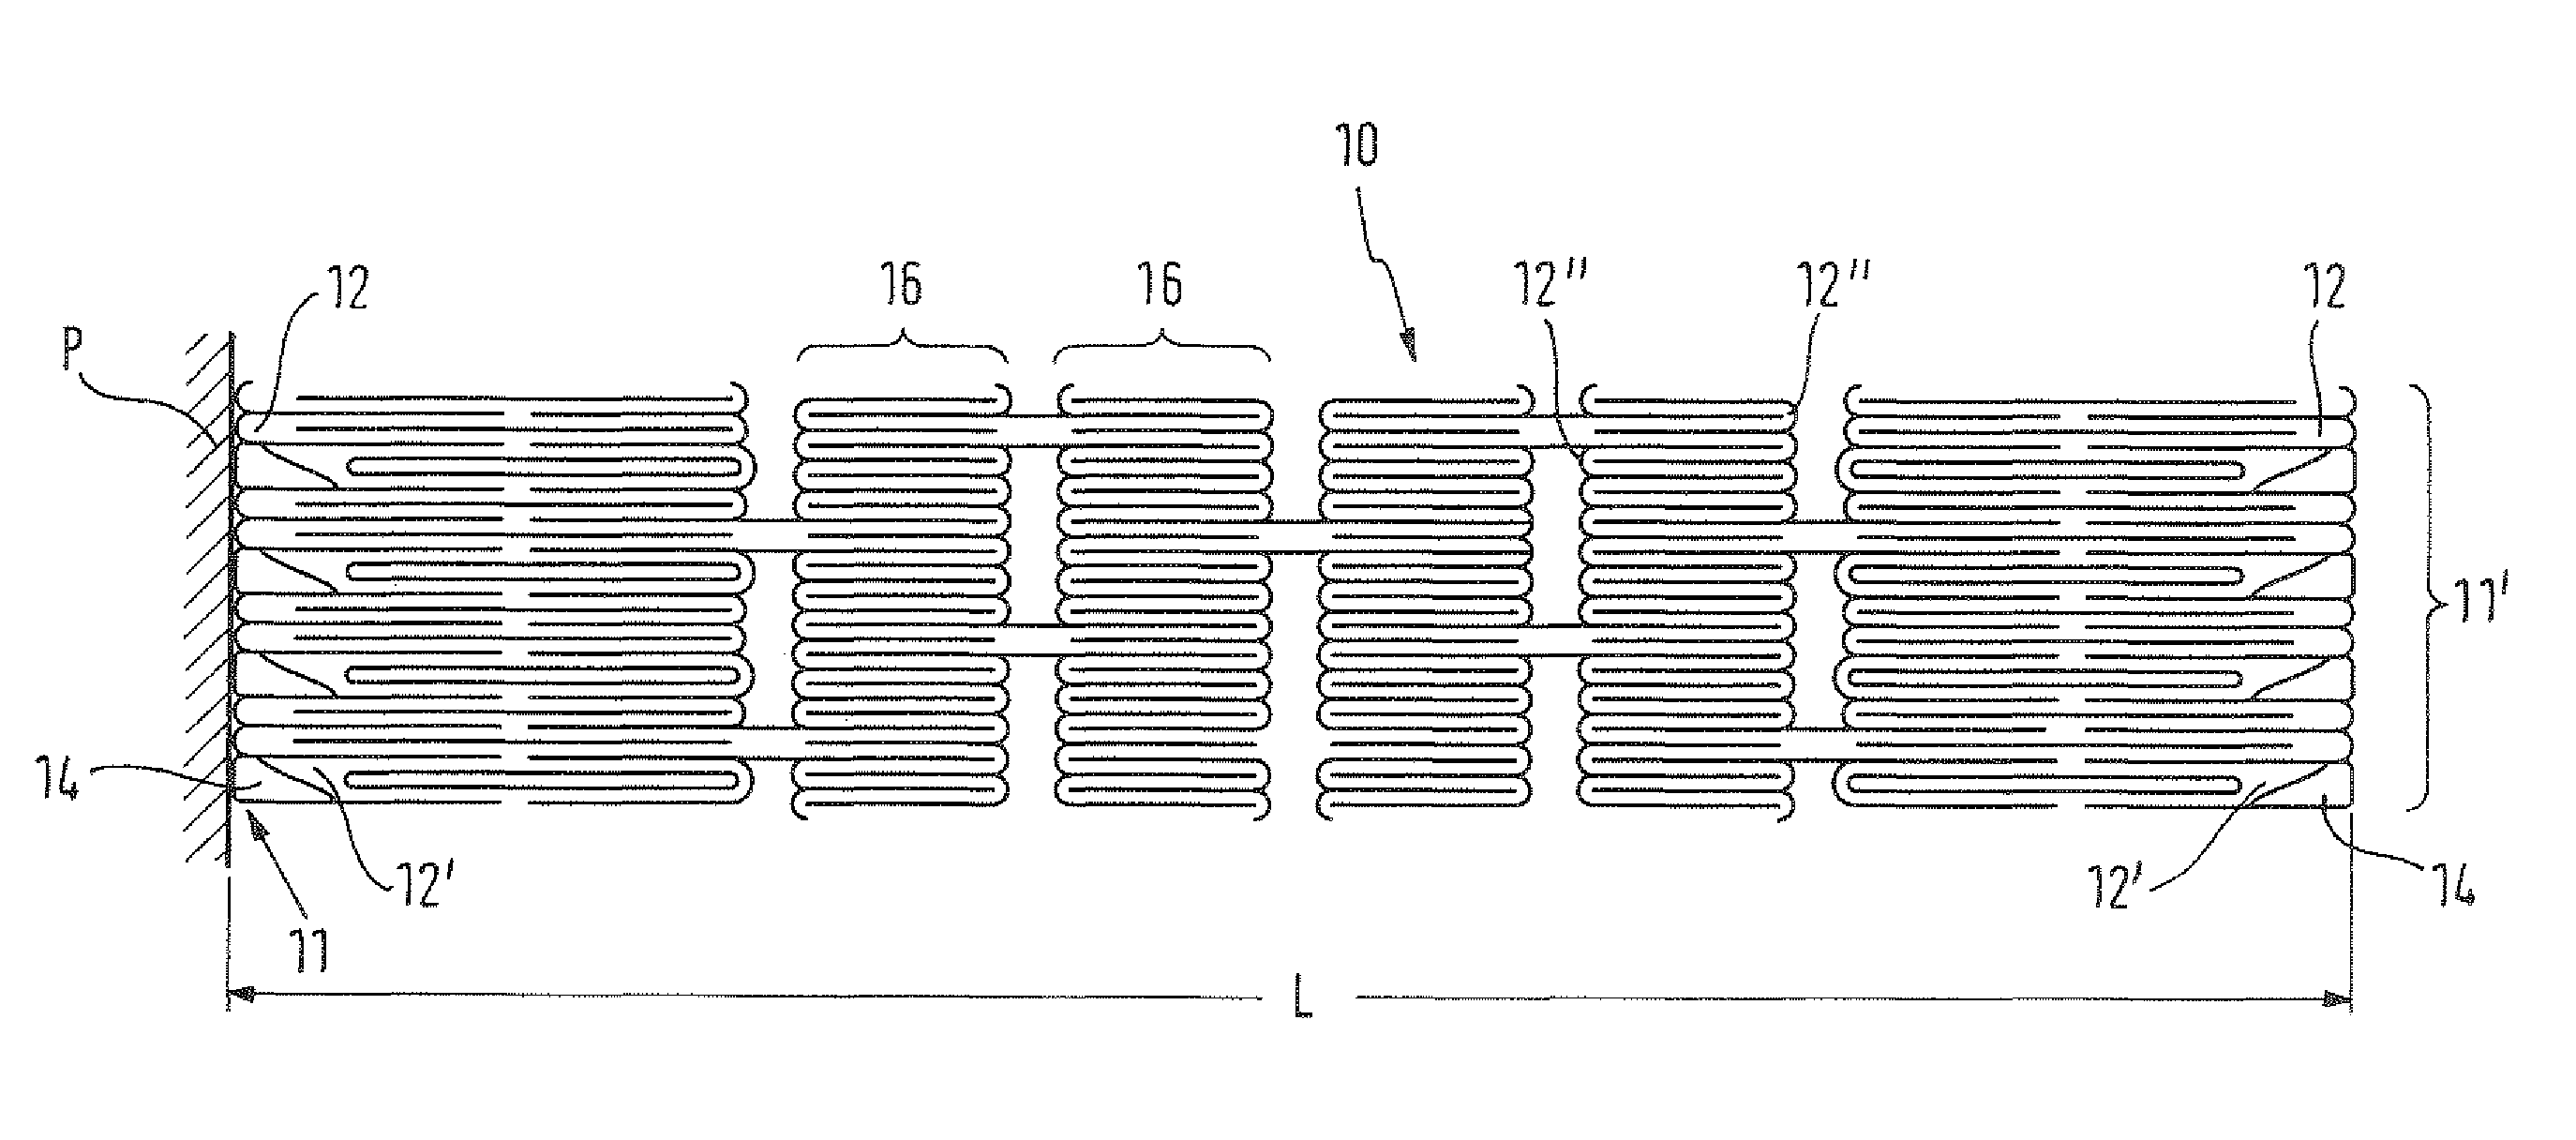 Self-expansible stent with radiopaque markers and method of making such a stent